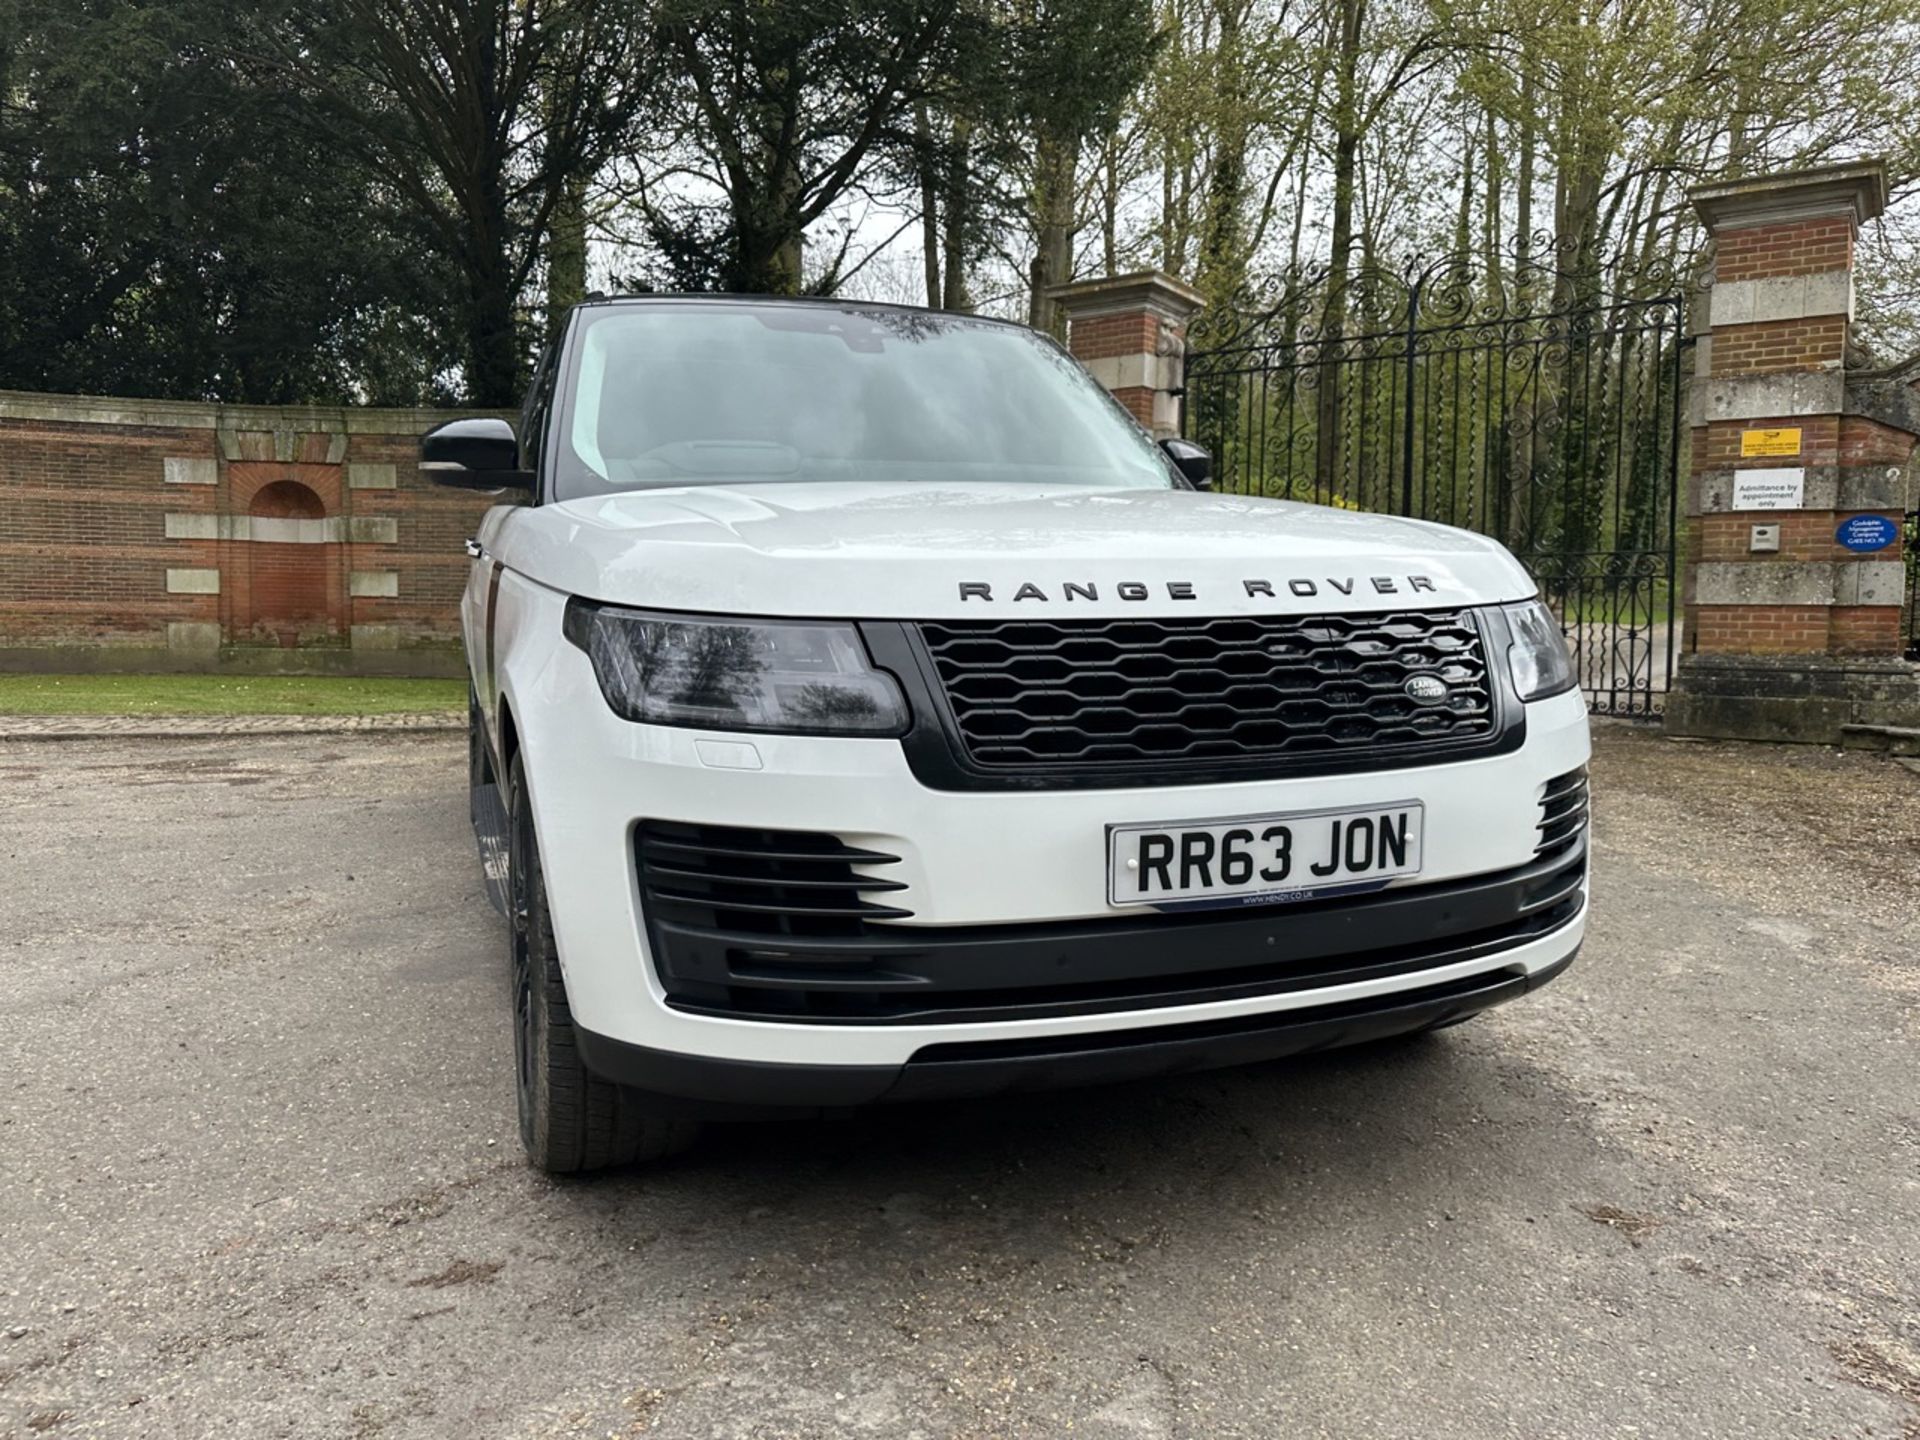 LAND ROVER RANGE ROVER 2.0 P400e Autobiography 4dr Auto - Automatic - 2018 - 31k miles - FULL SH - Image 7 of 22